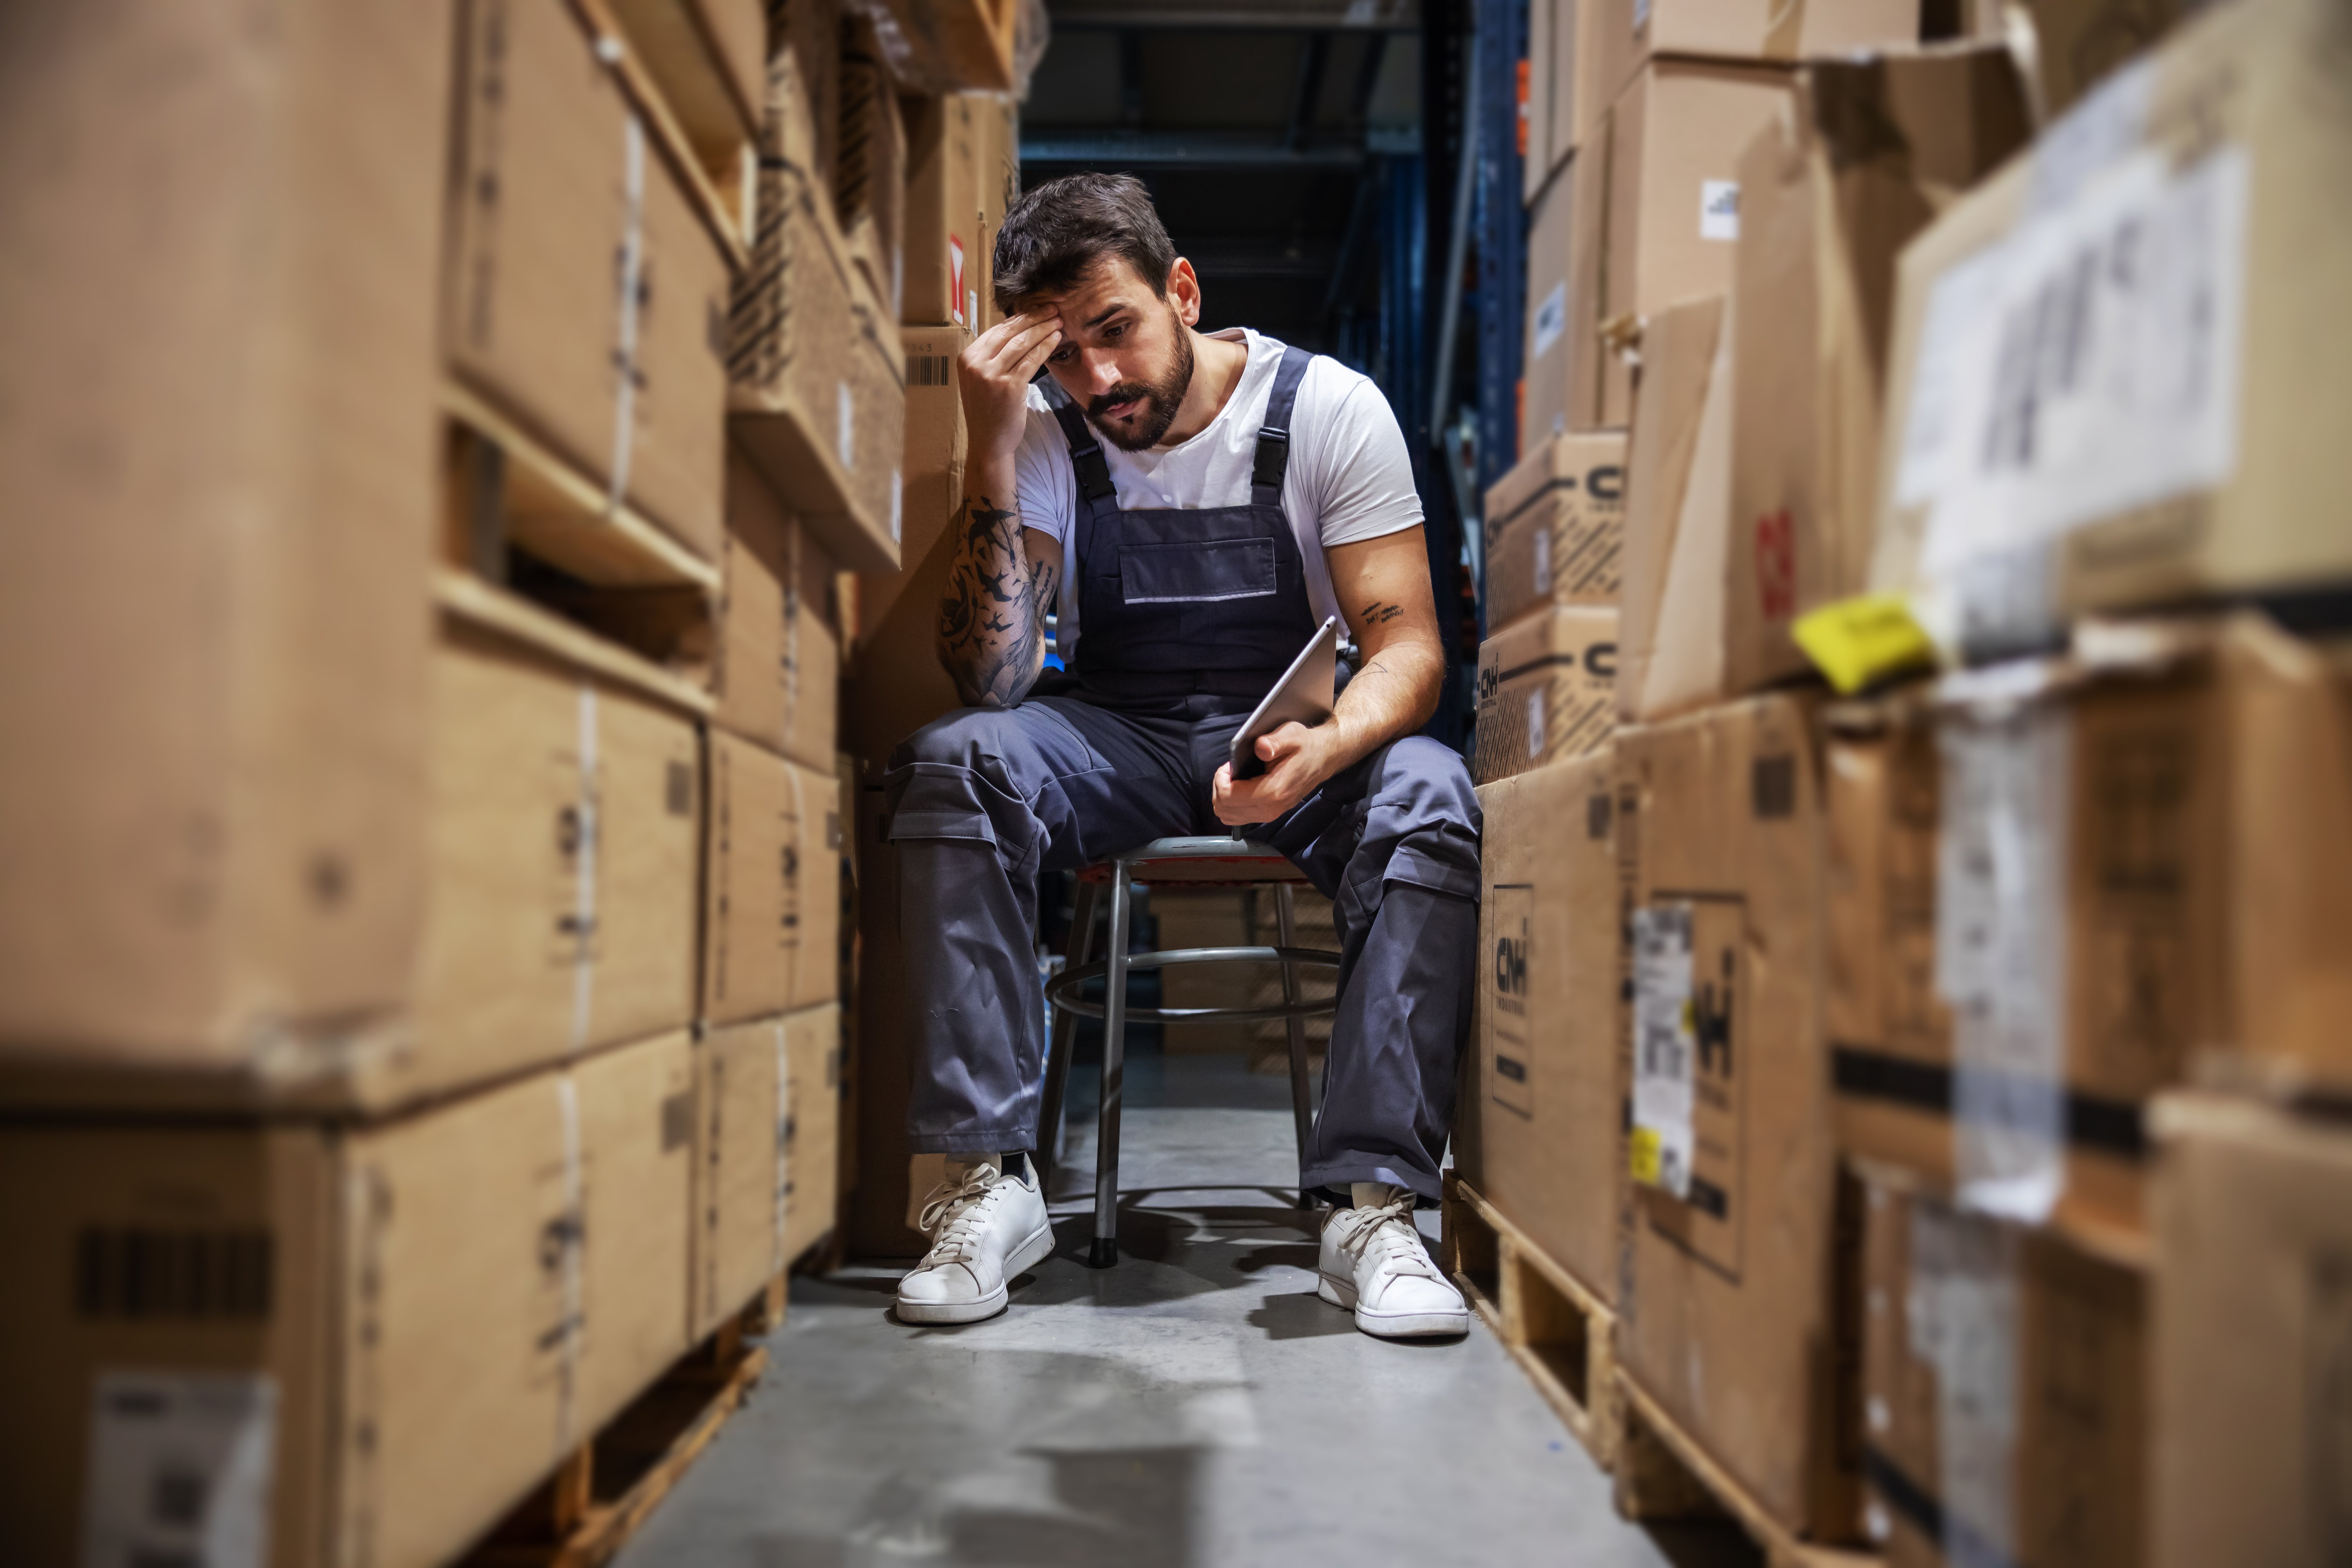 frustrated man sitting between stacks of boxes in a storage warehouse